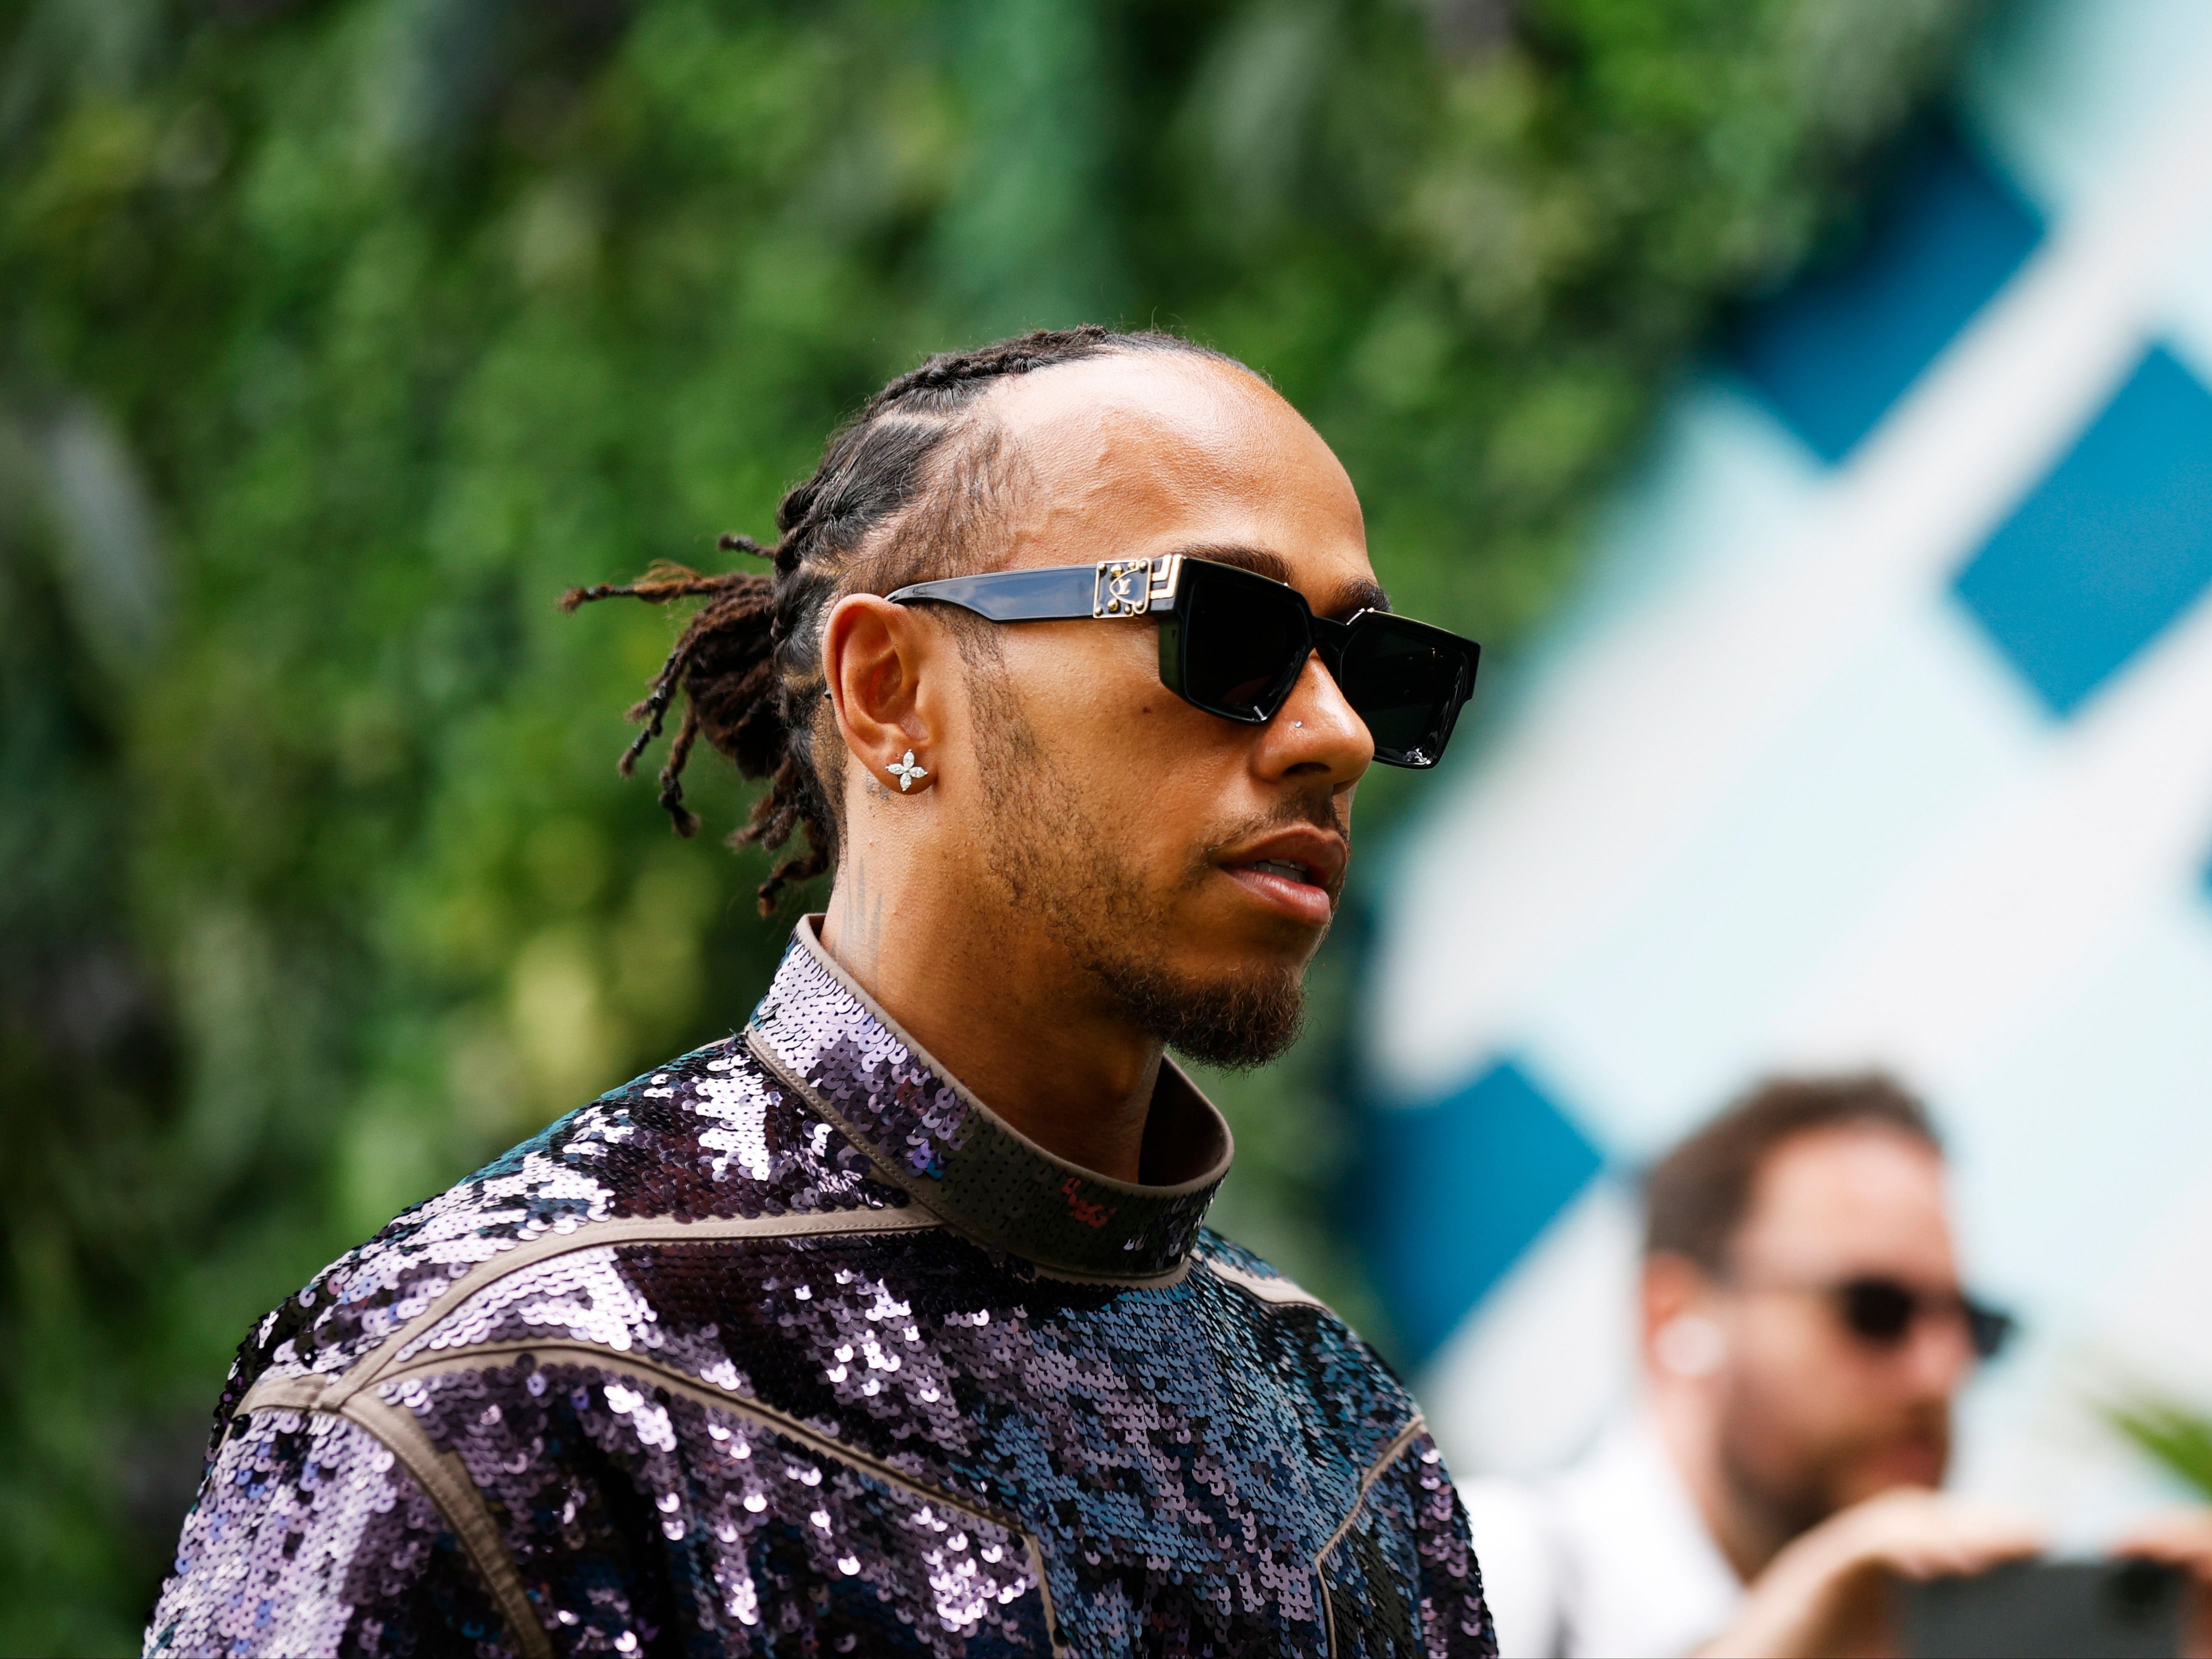 Lewis Hamilton walks in the paddock prior to the 2023 F1 Miami Grand Prix. (Photo by Jared C. Tilton/Getty Images)